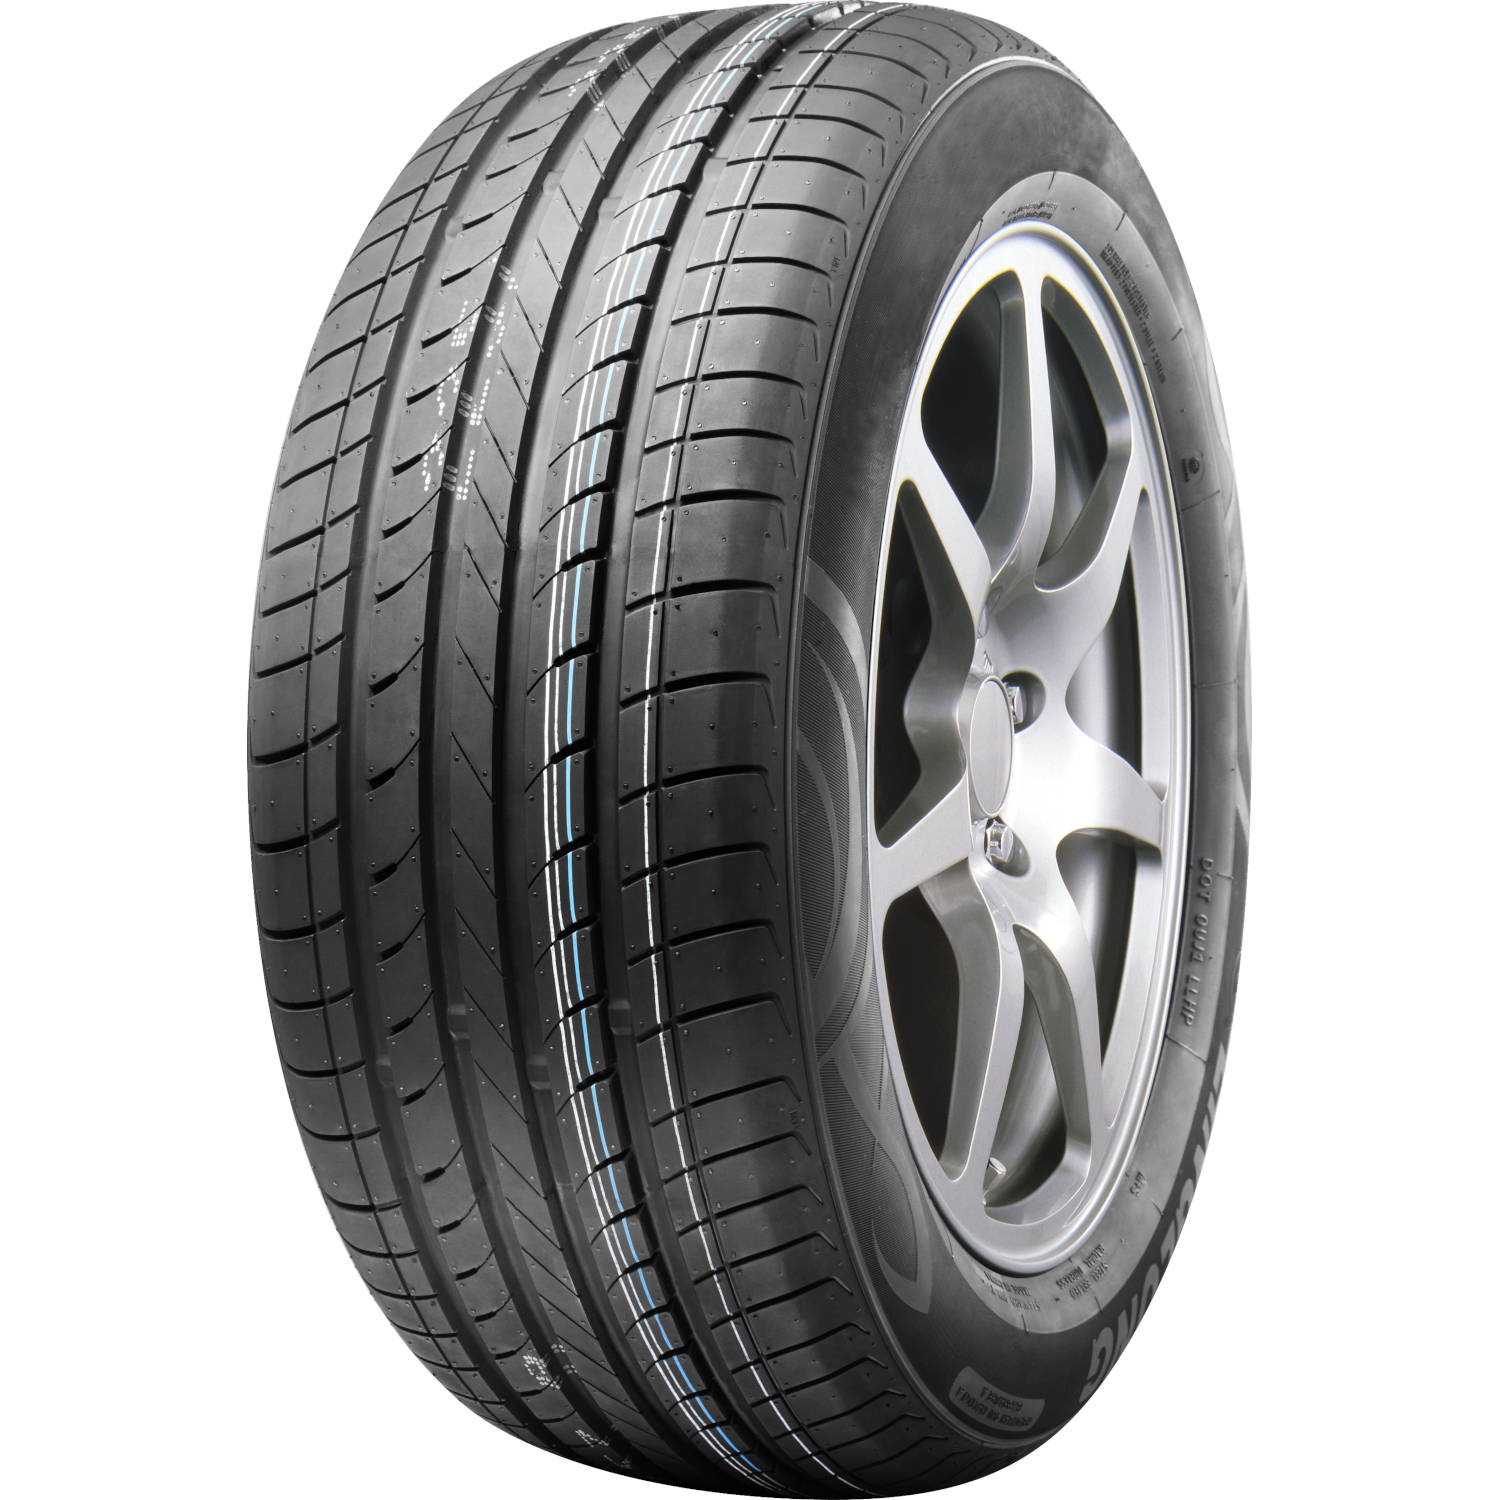 ROAD ONE CAVALRY HP 185/60R15 (23.7X7.3R 15) Tires